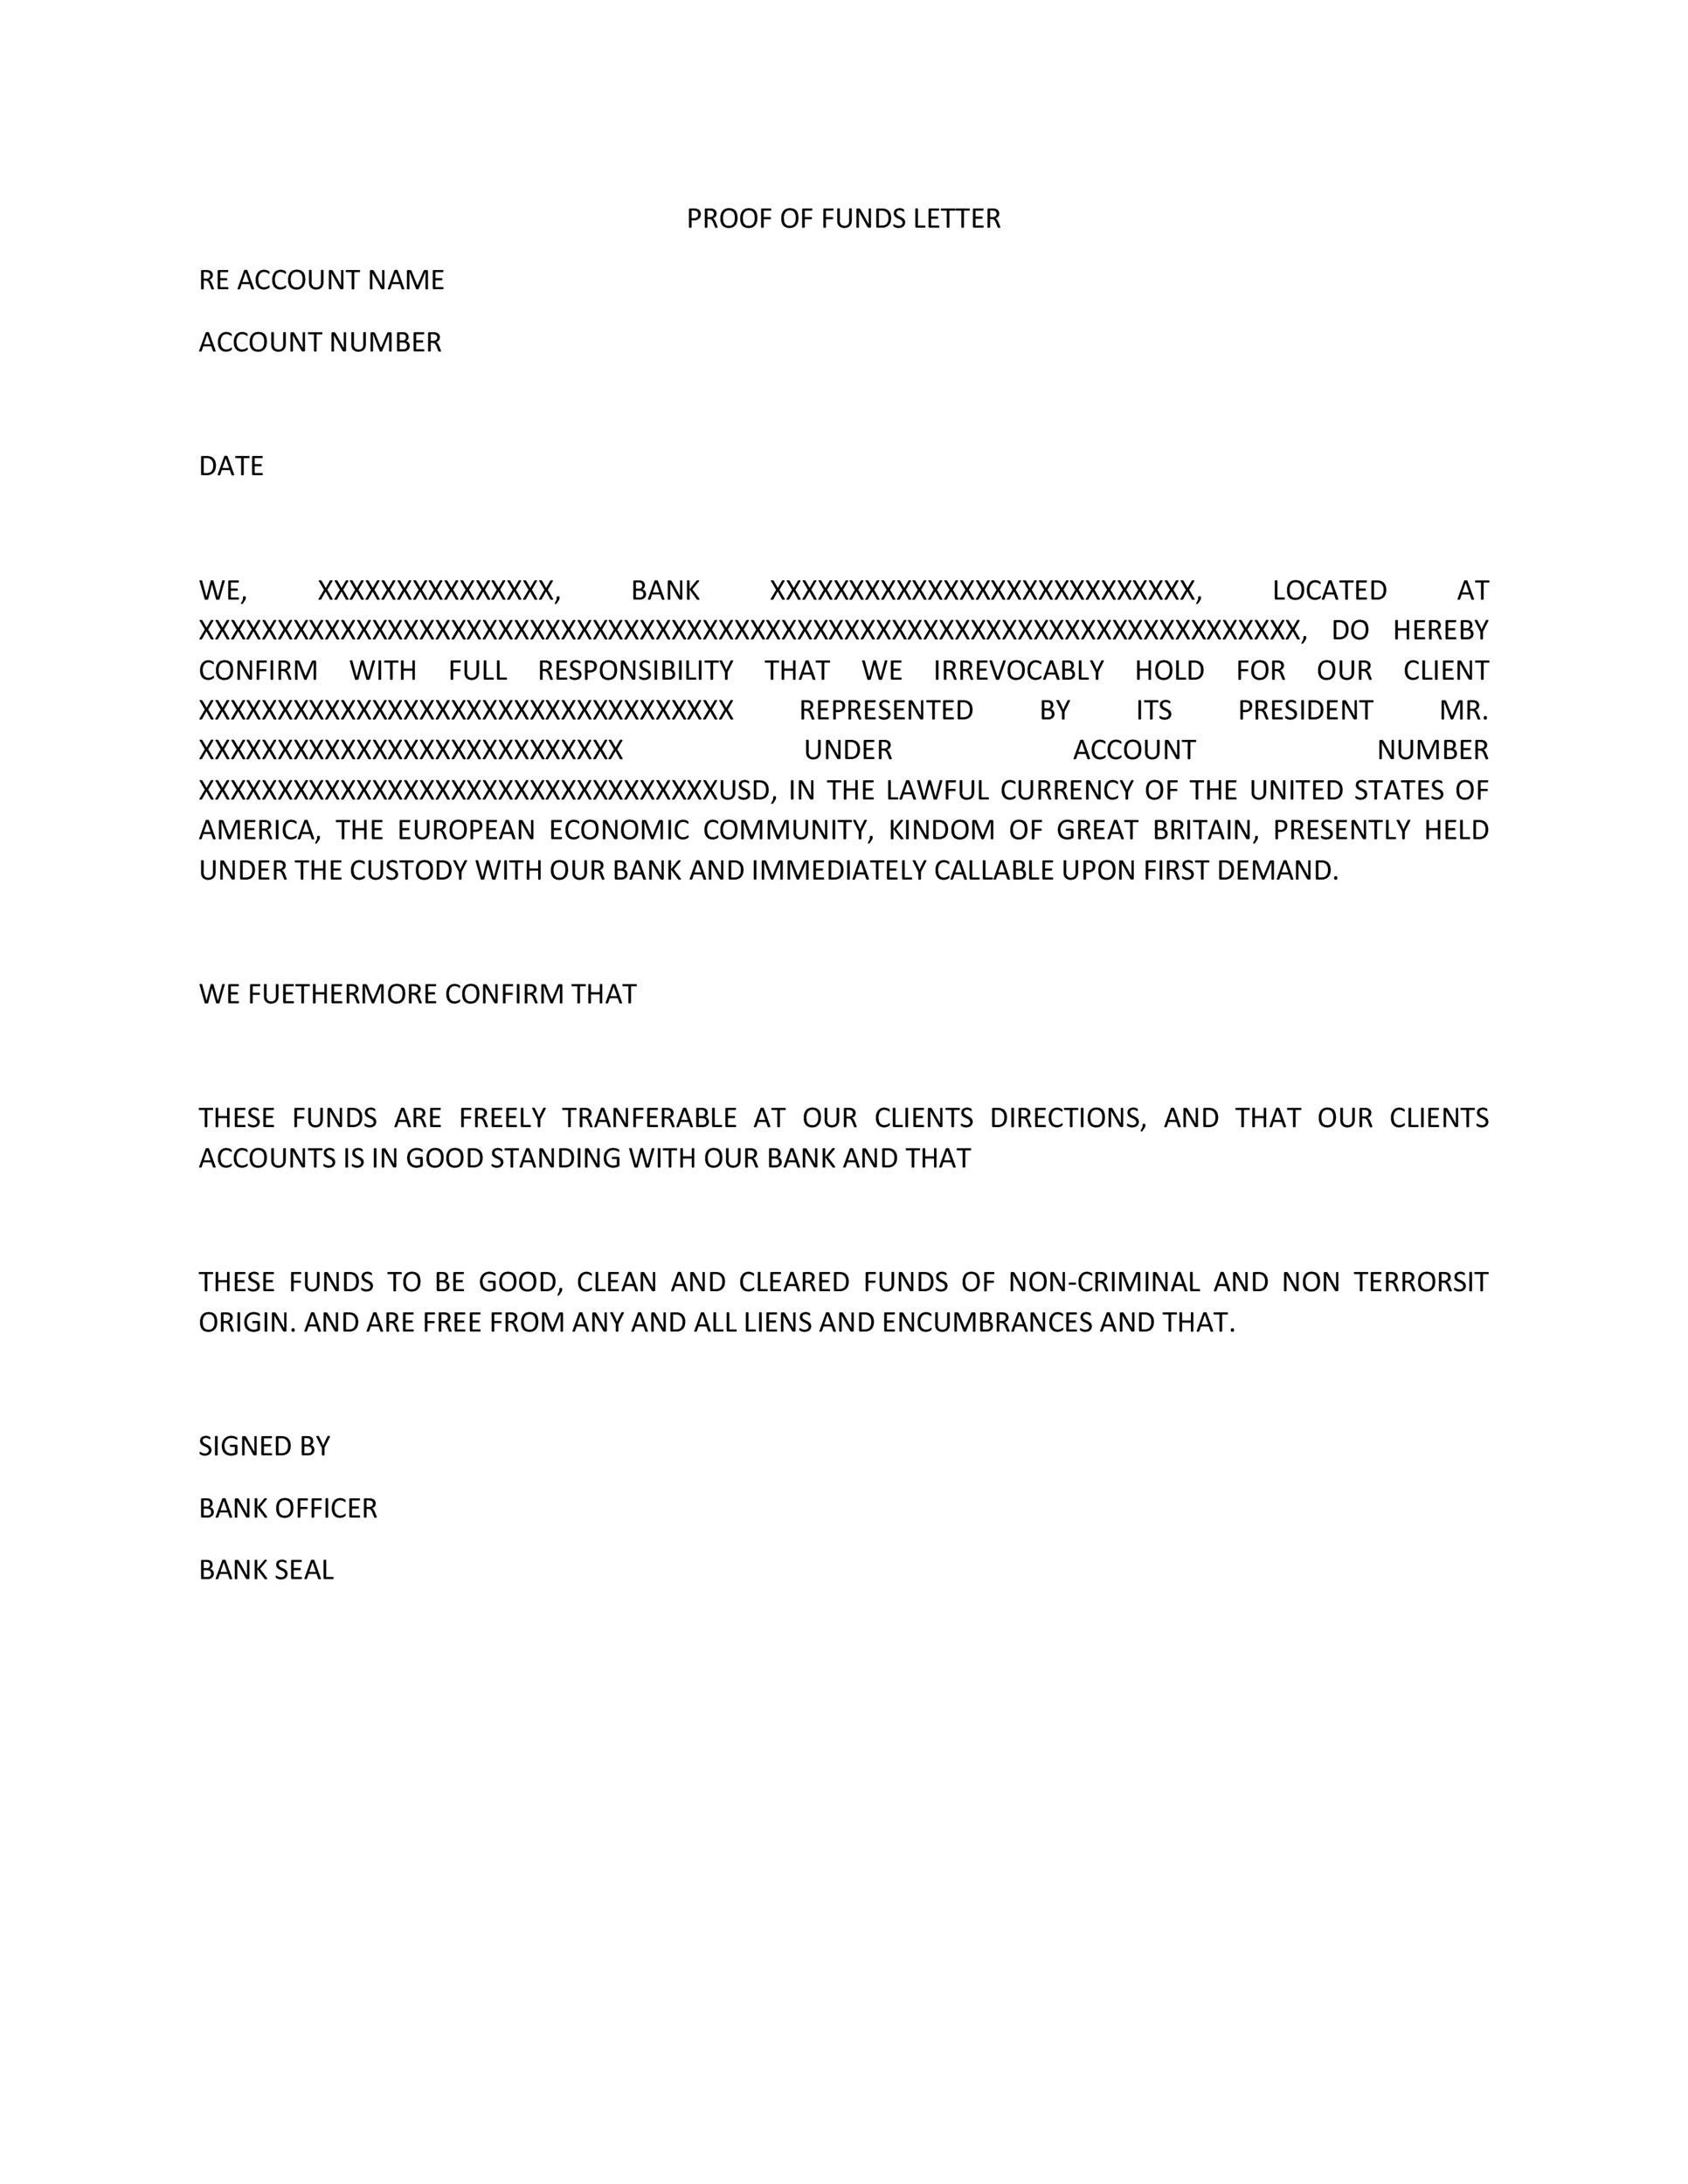 Funding Letter Template With Proof Of Funds Letter Template